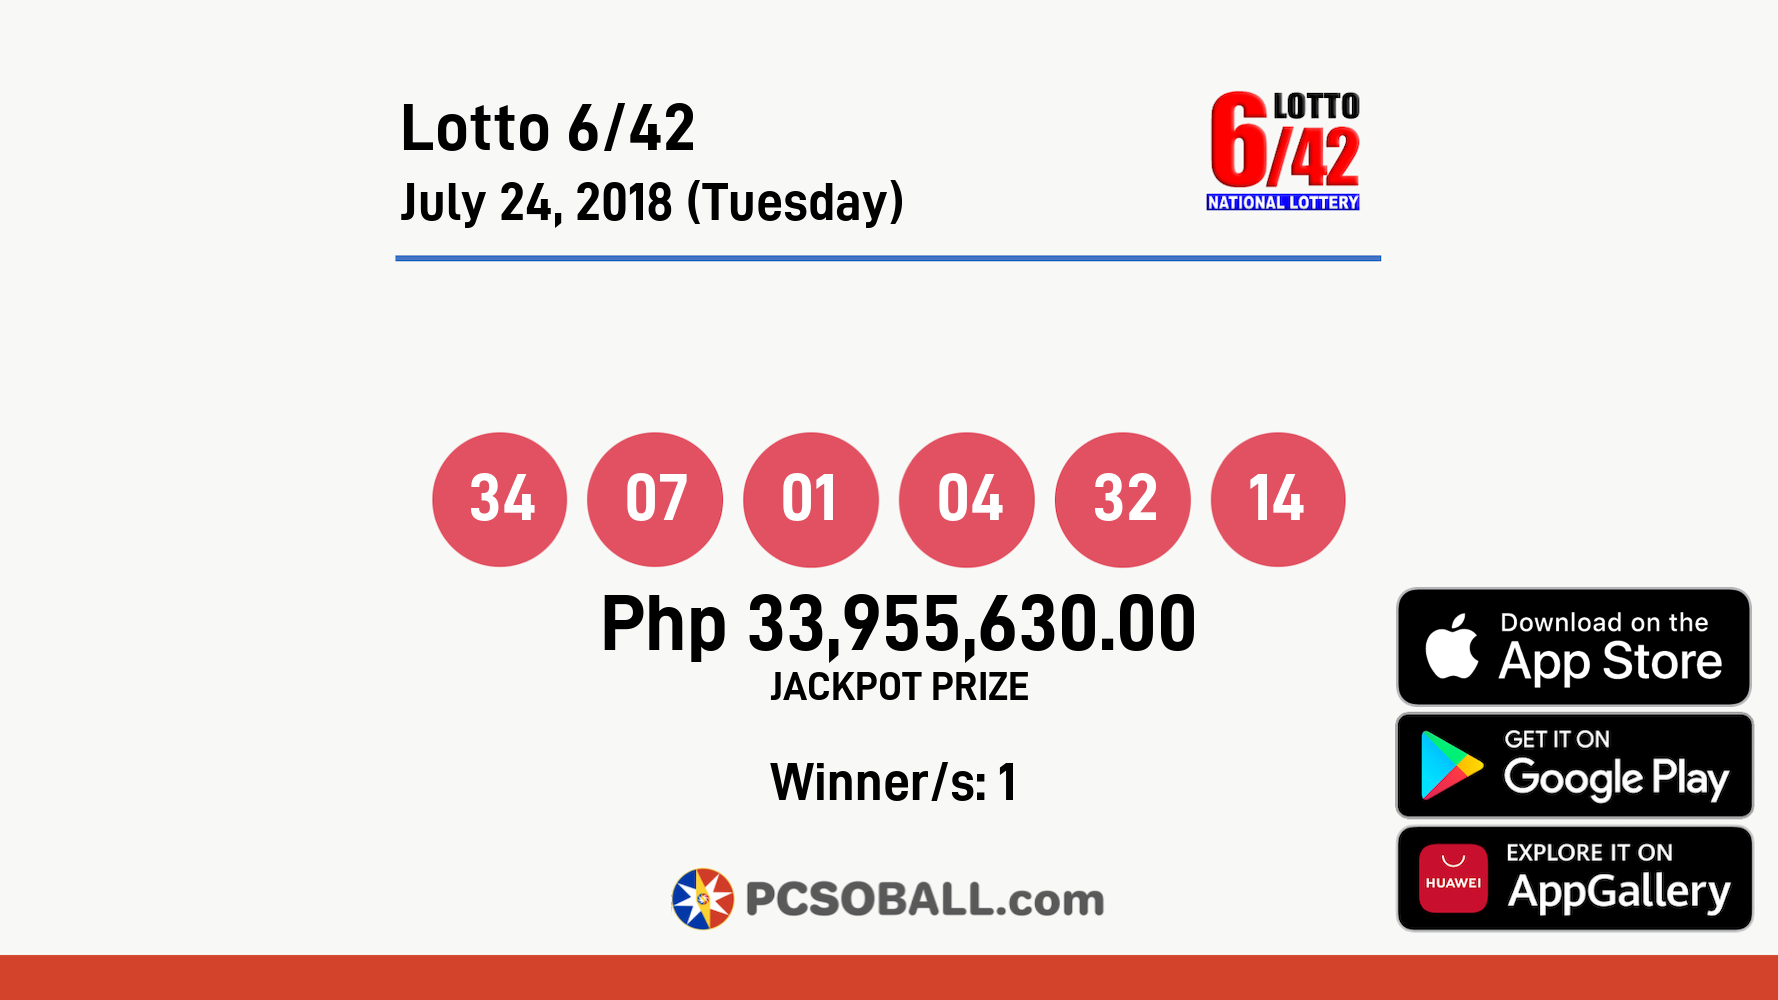 Lotto 6/42 July 24, 2018 (Tuesday) Result